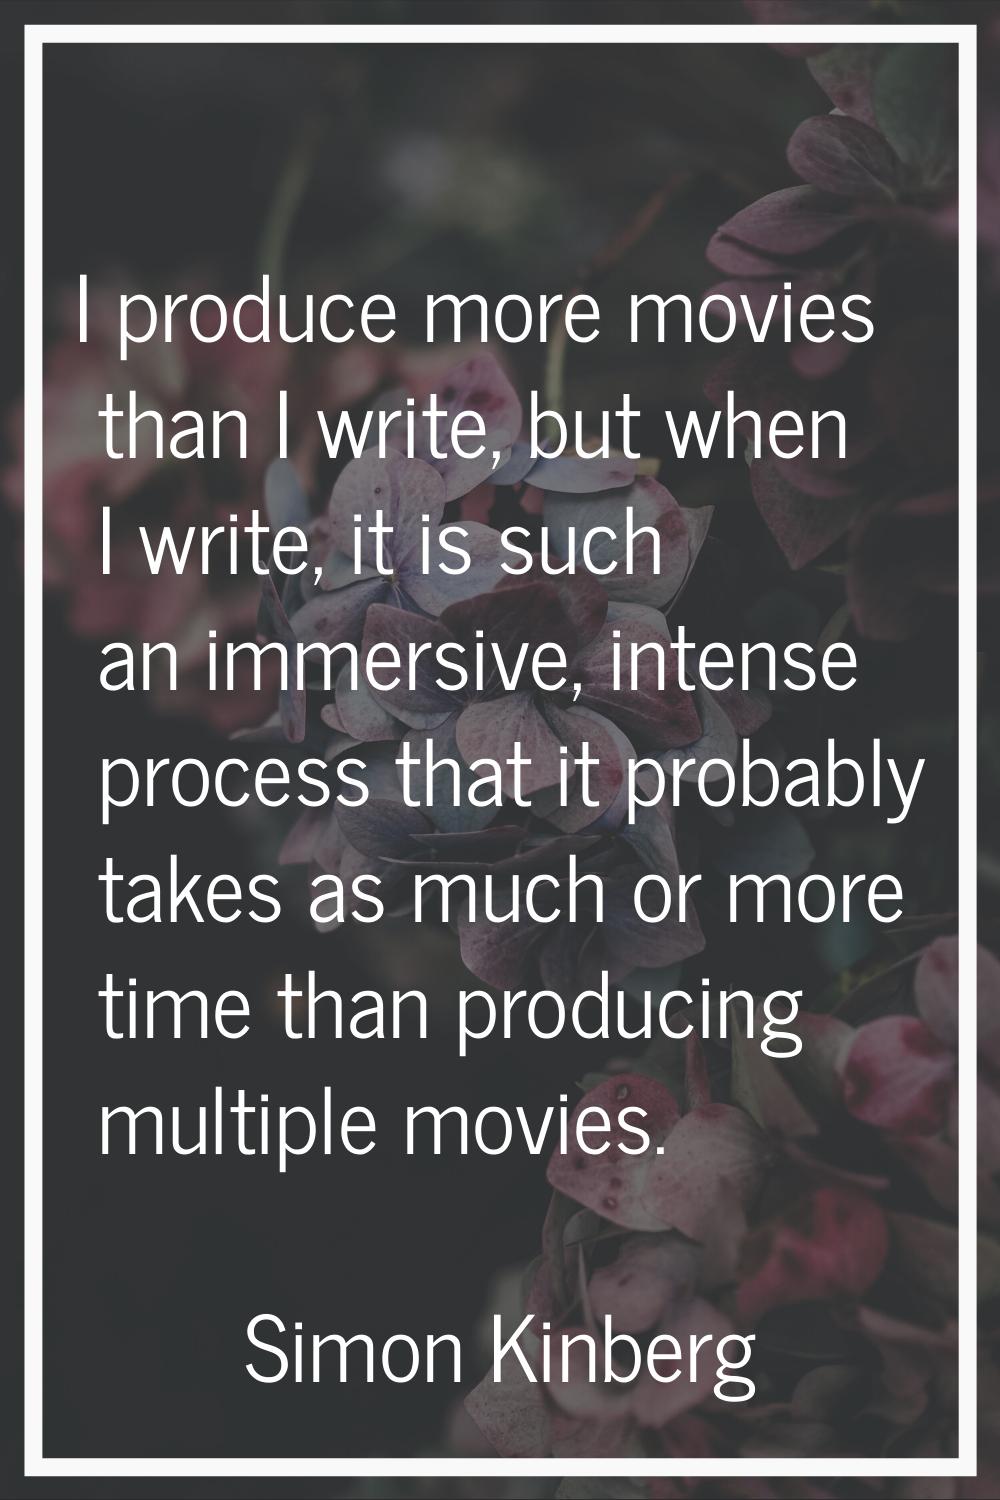 I produce more movies than I write, but when I write, it is such an immersive, intense process that